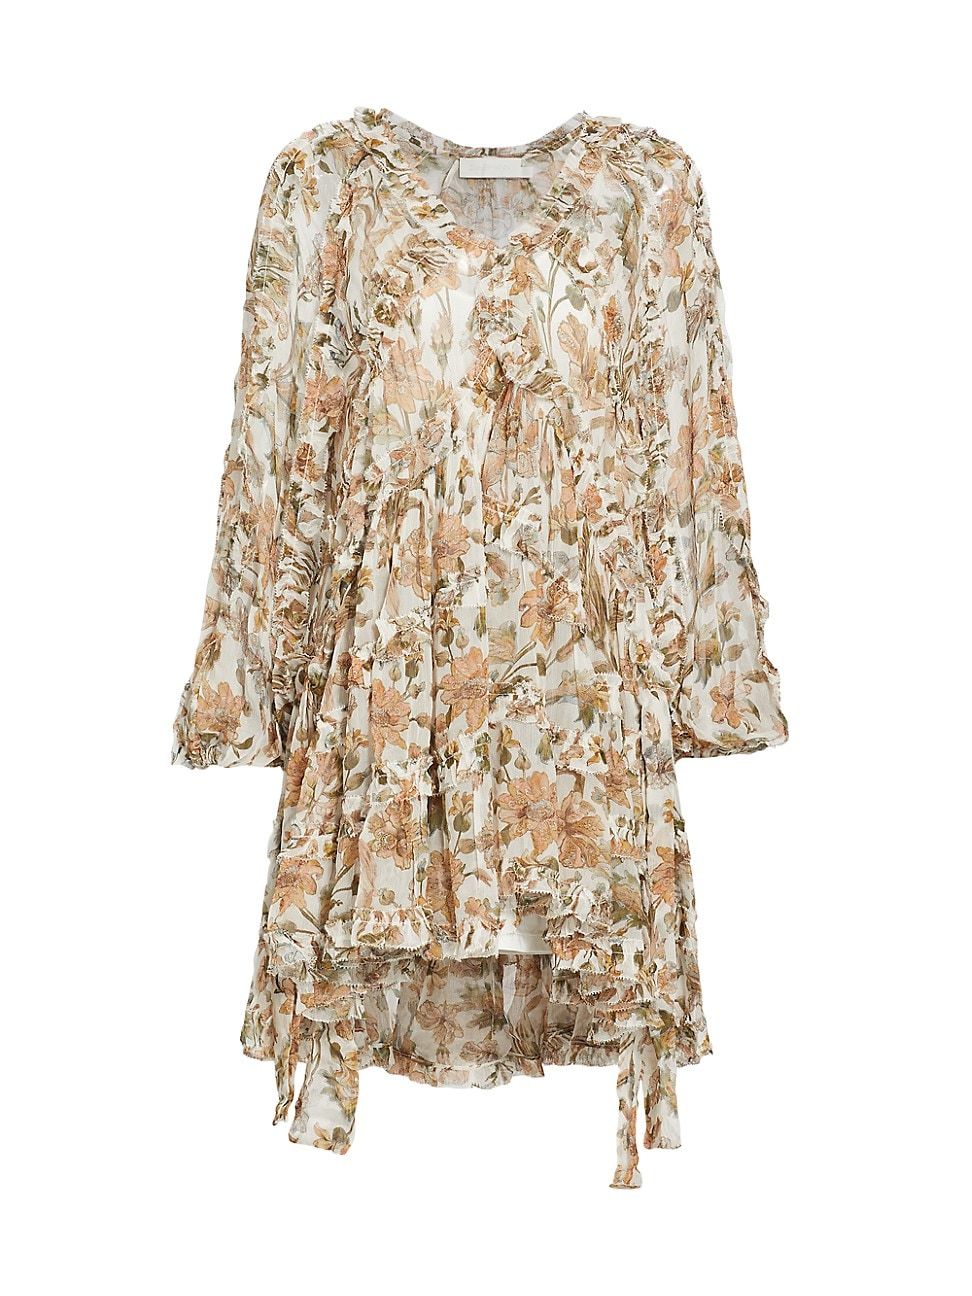 Women's Chintz Floral Frill Minidress - Ivory Daisy Floral - Size 2 | Saks Fifth Avenue